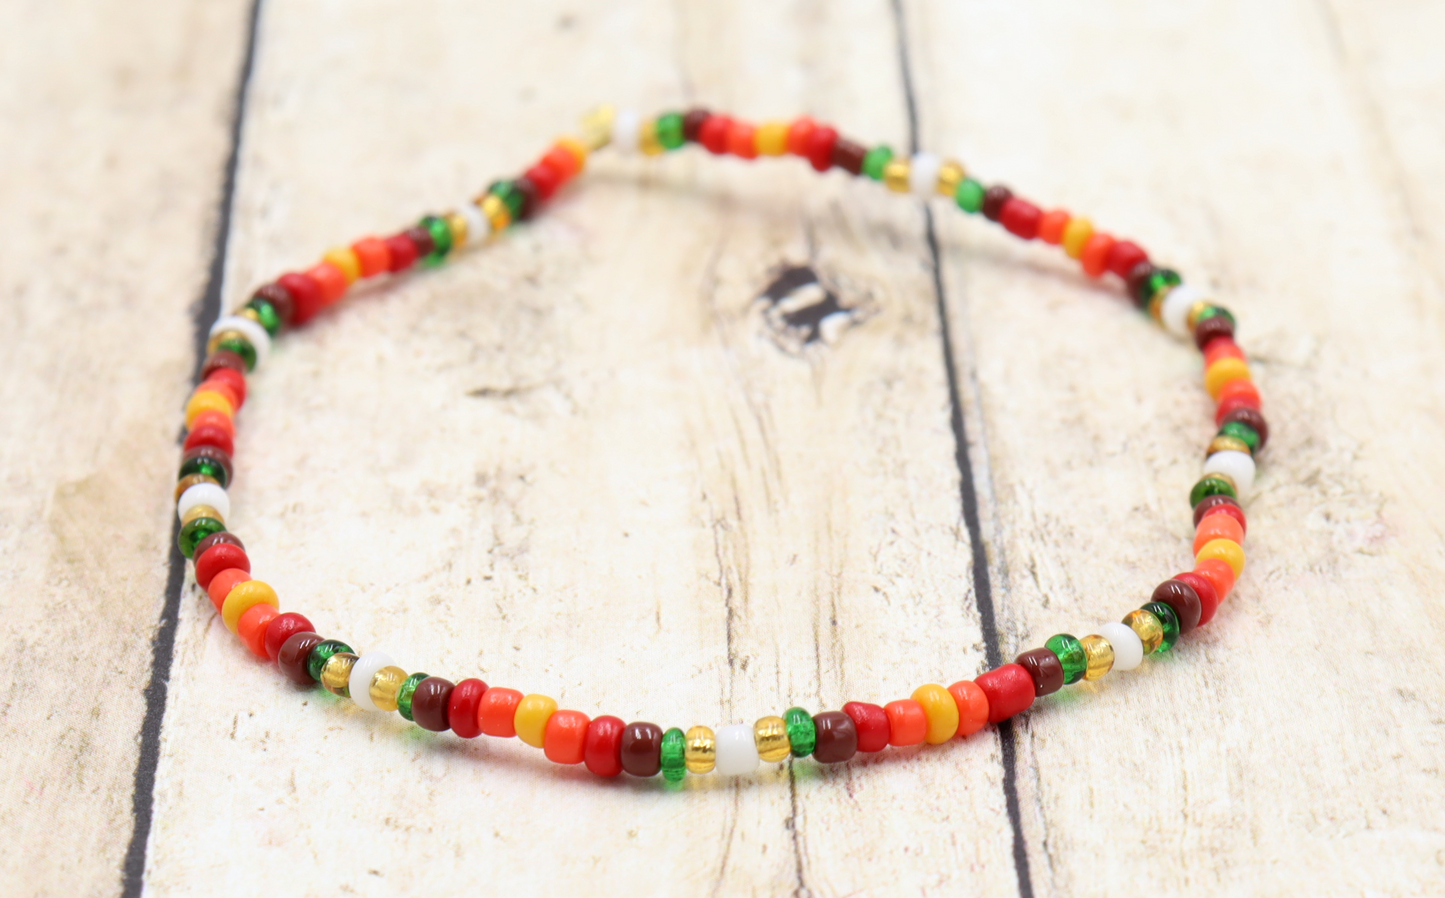 It's Turkey Time! Happy Thanksgiving and Autumn Hued Glass Bead Stack Bracelet by Monkey's Mojo